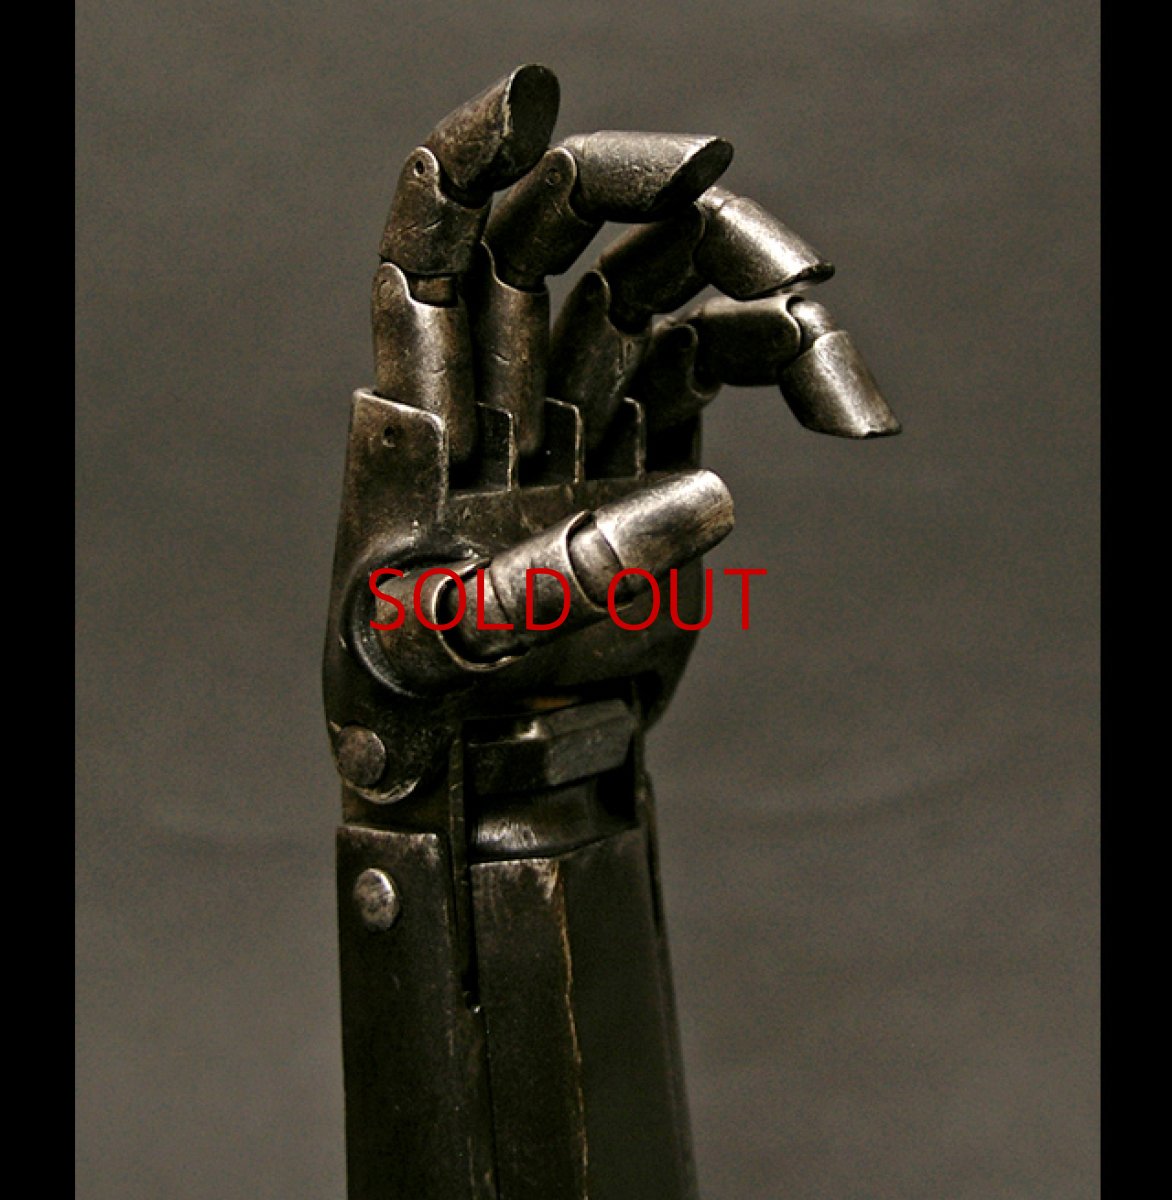 No 242 Guts Arm Cannon 1 2 Scale 40 Off Sold Out Art Of War